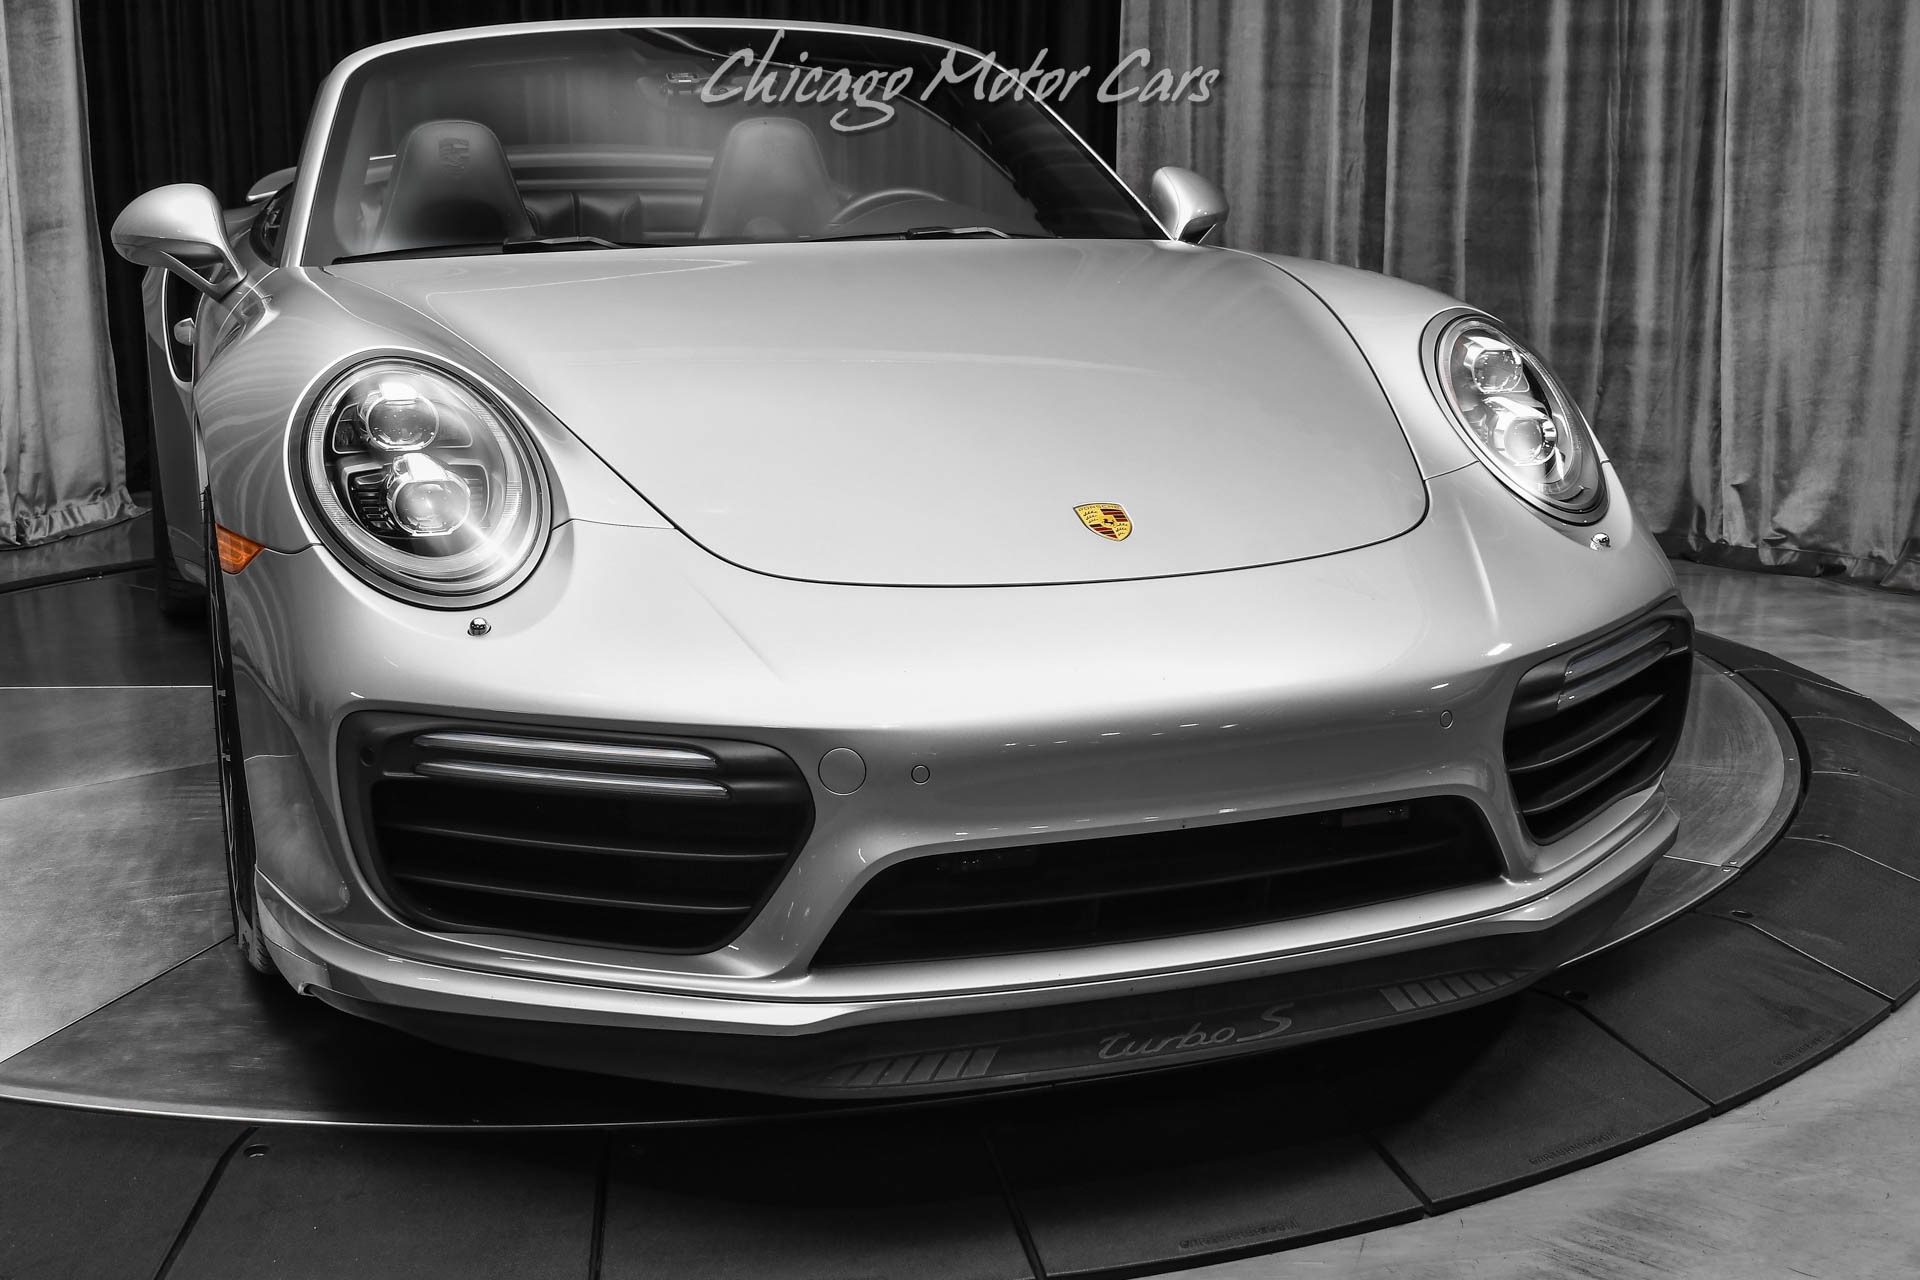 Used-2017-Porsche-911-Turbo-S-Cabriolet-Convertible-MSRP-208185